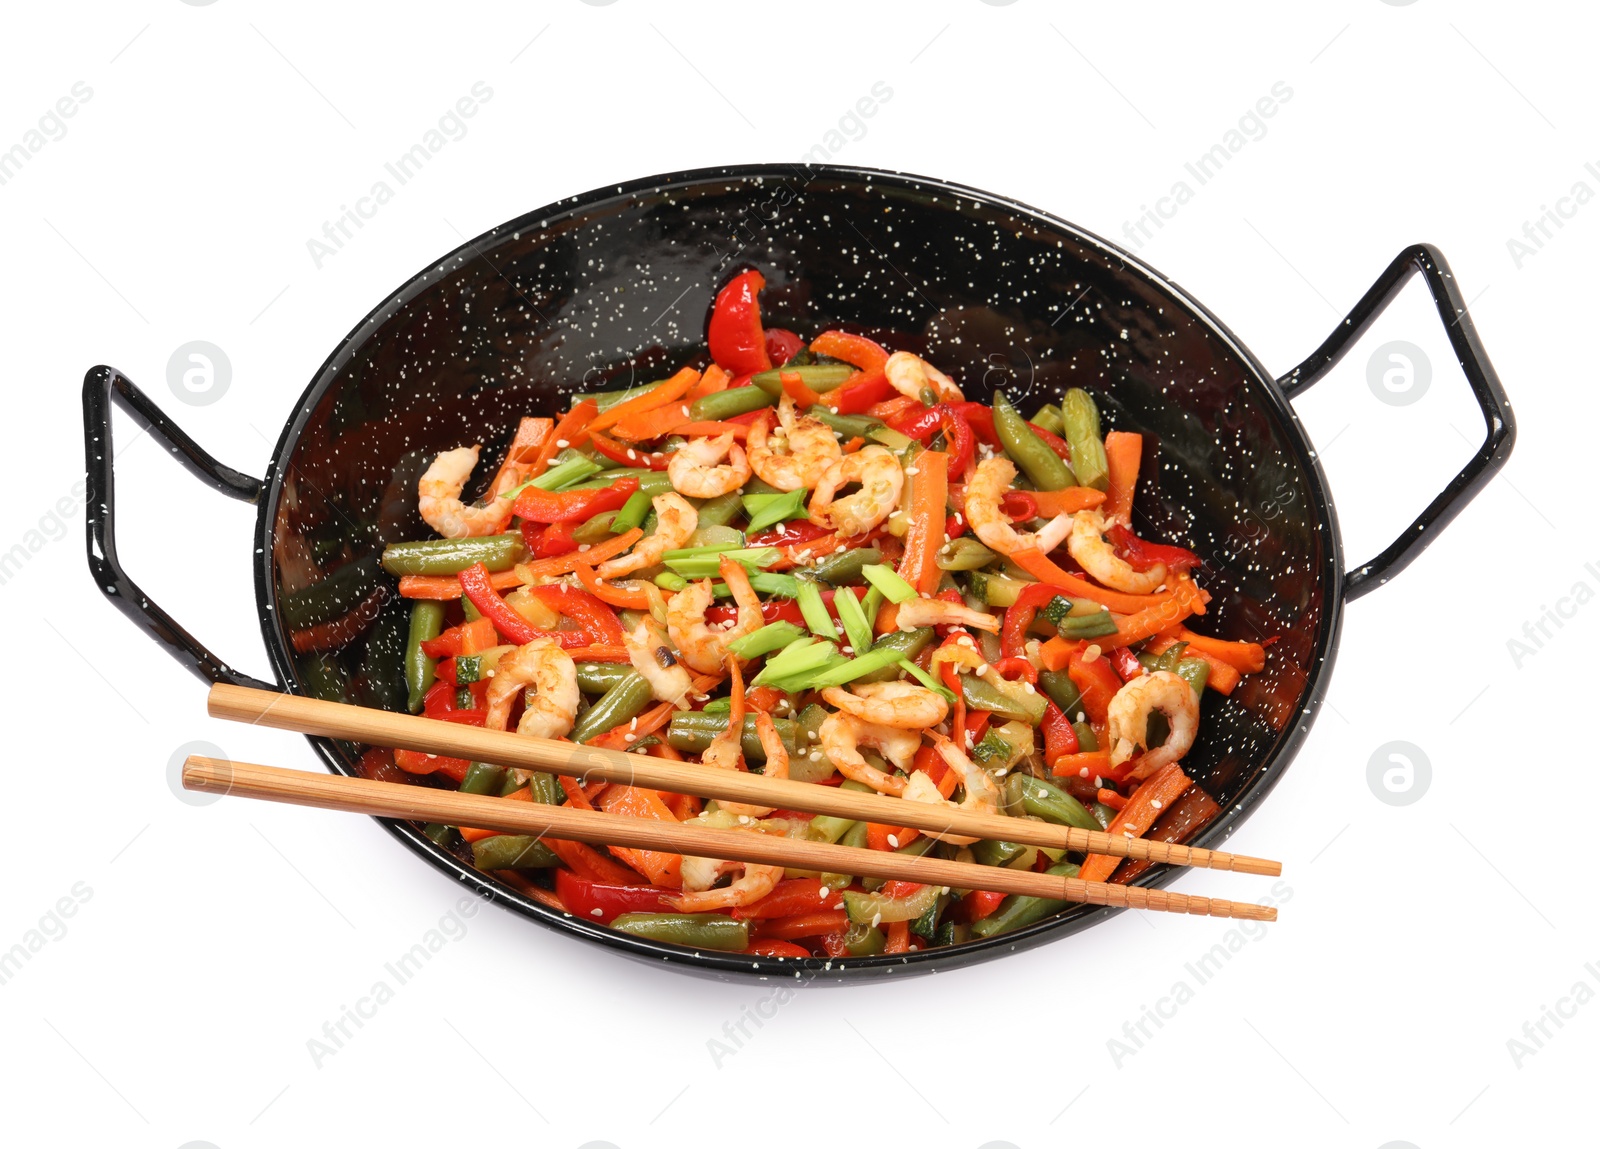 Photo of Shrimp stir fry with vegetables in wok and chopsticks on white background